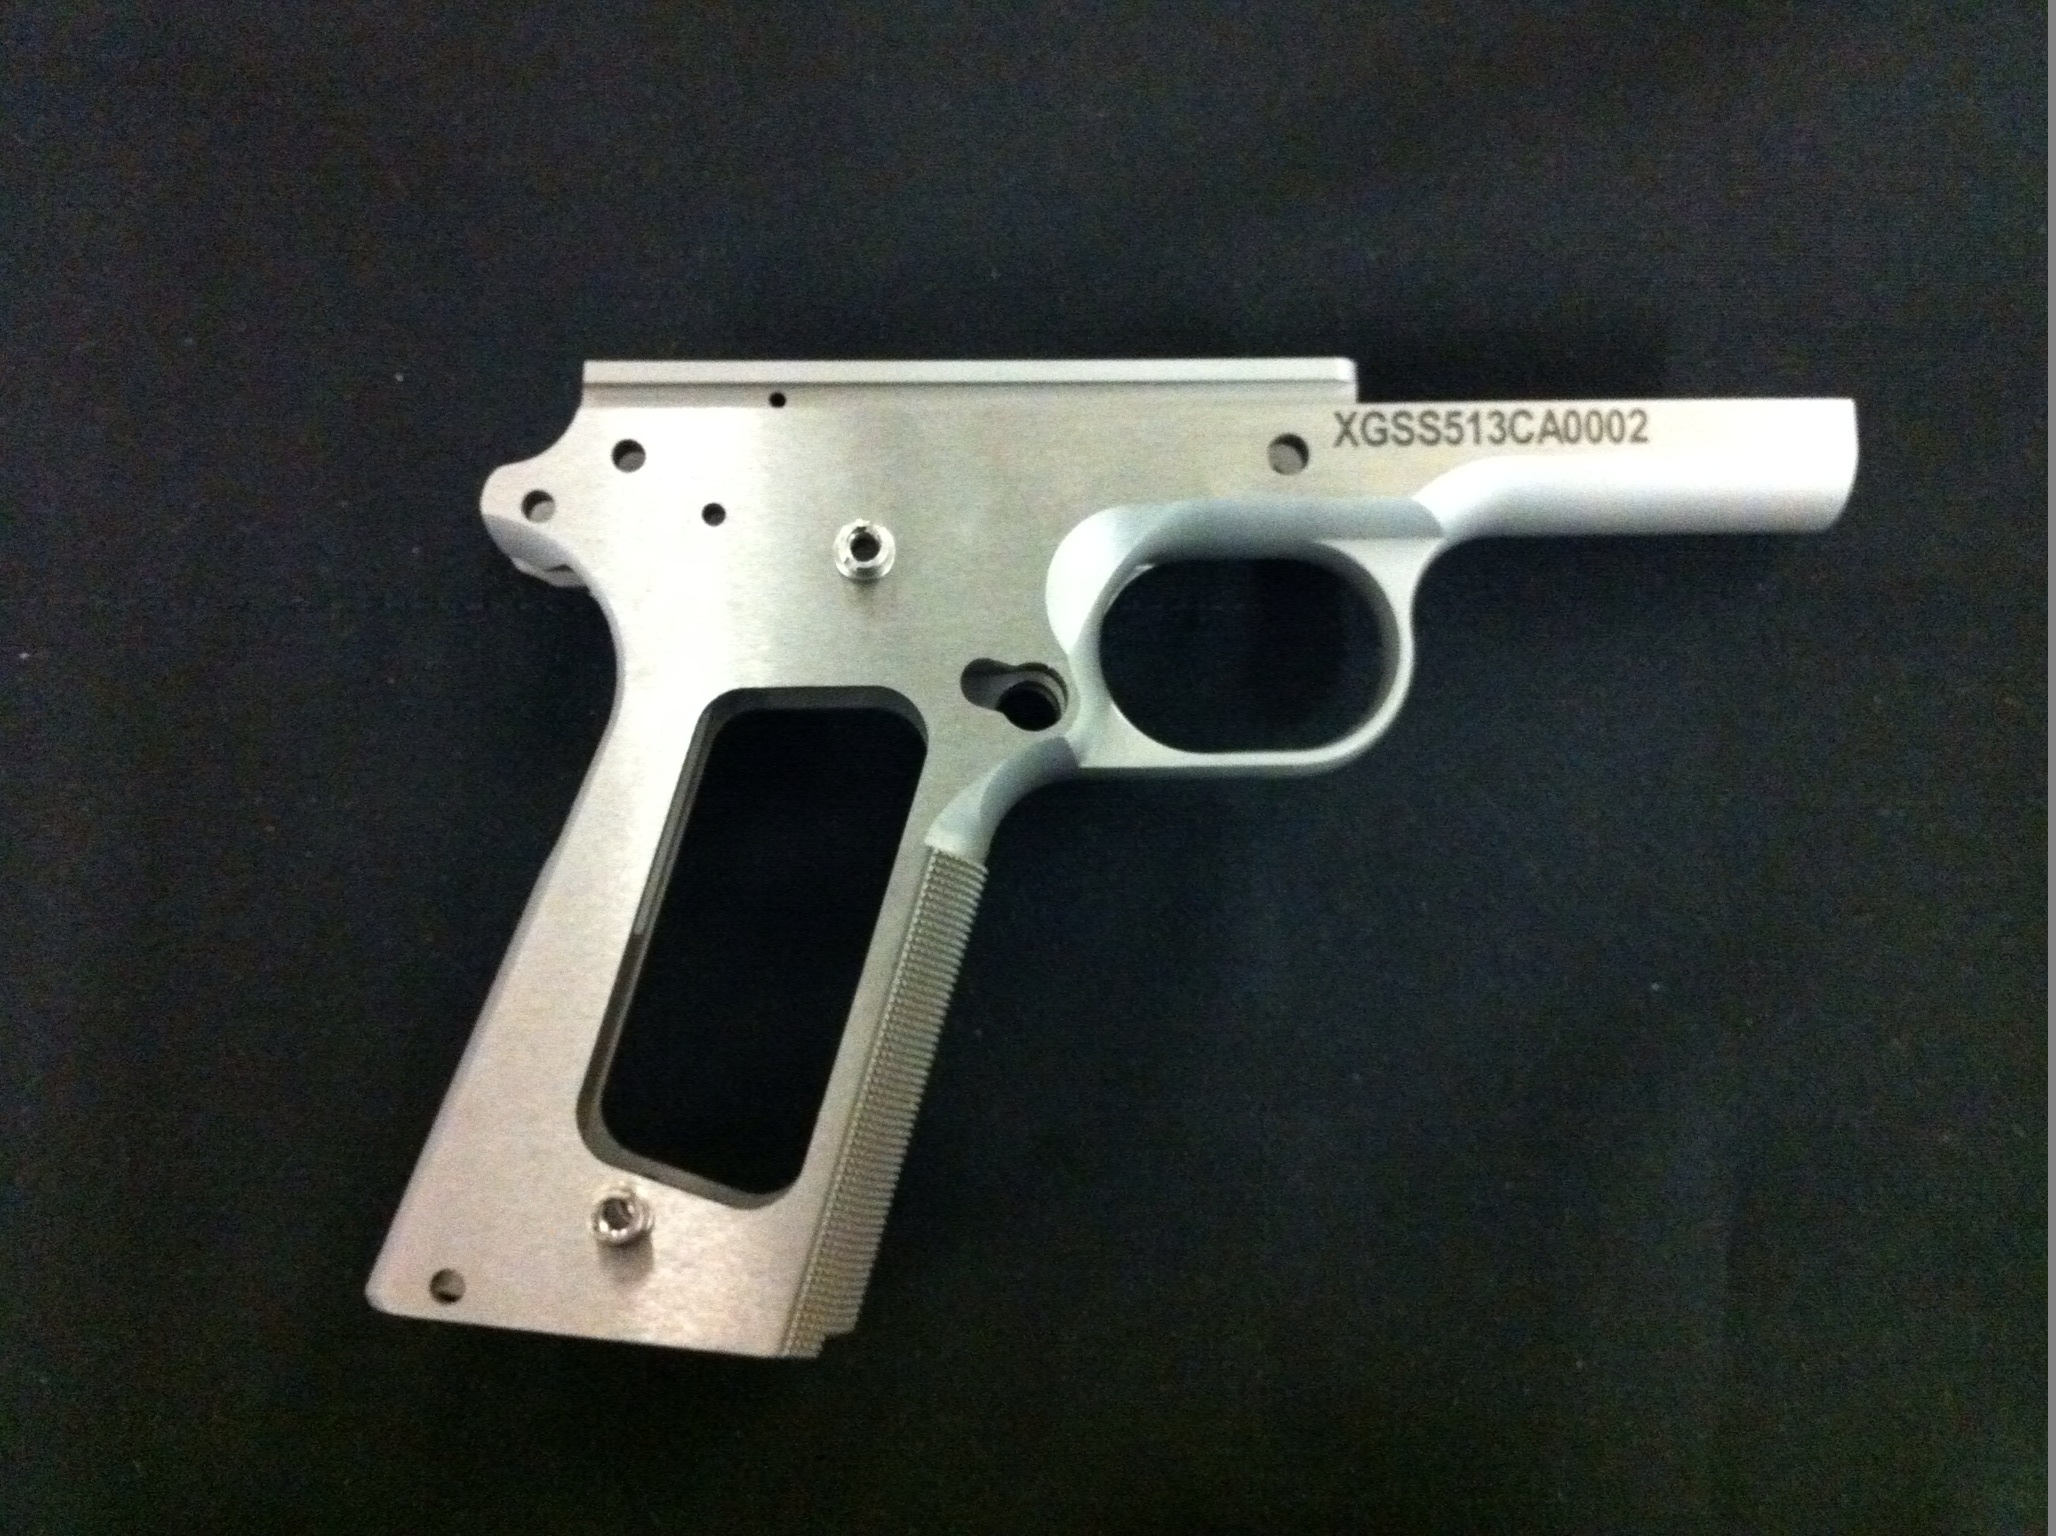 Xtreme Gun 1911 5" Forged Stainless Frame 9mm